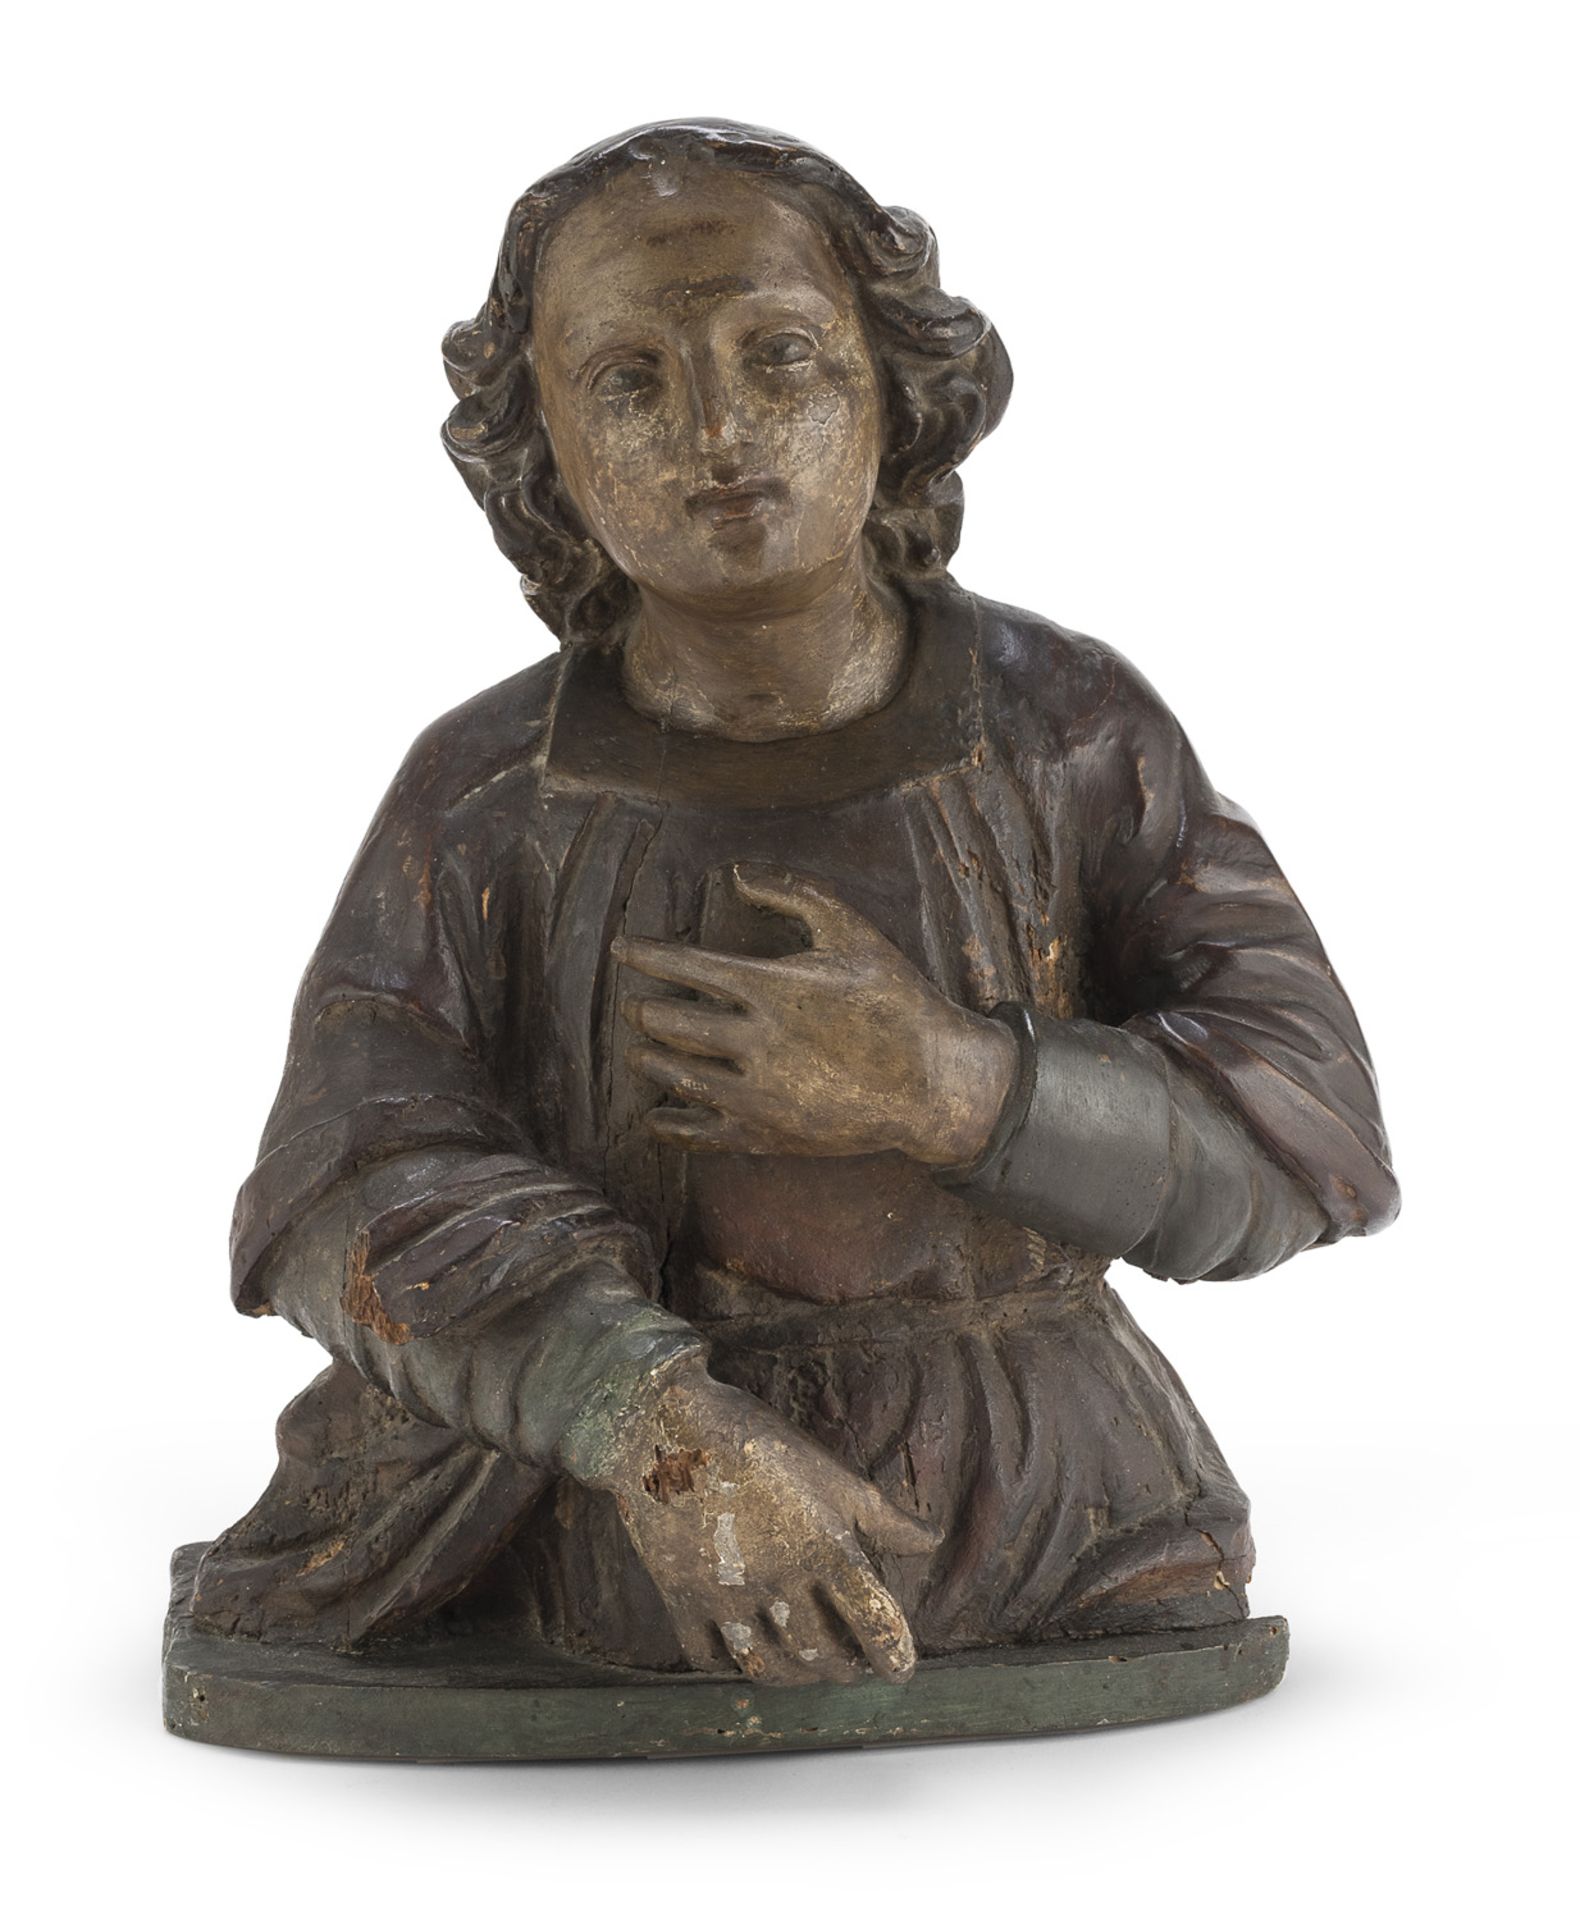 LACQUERED WOOD SCULPTURE CENTRAL ITALY 17th CENTURY